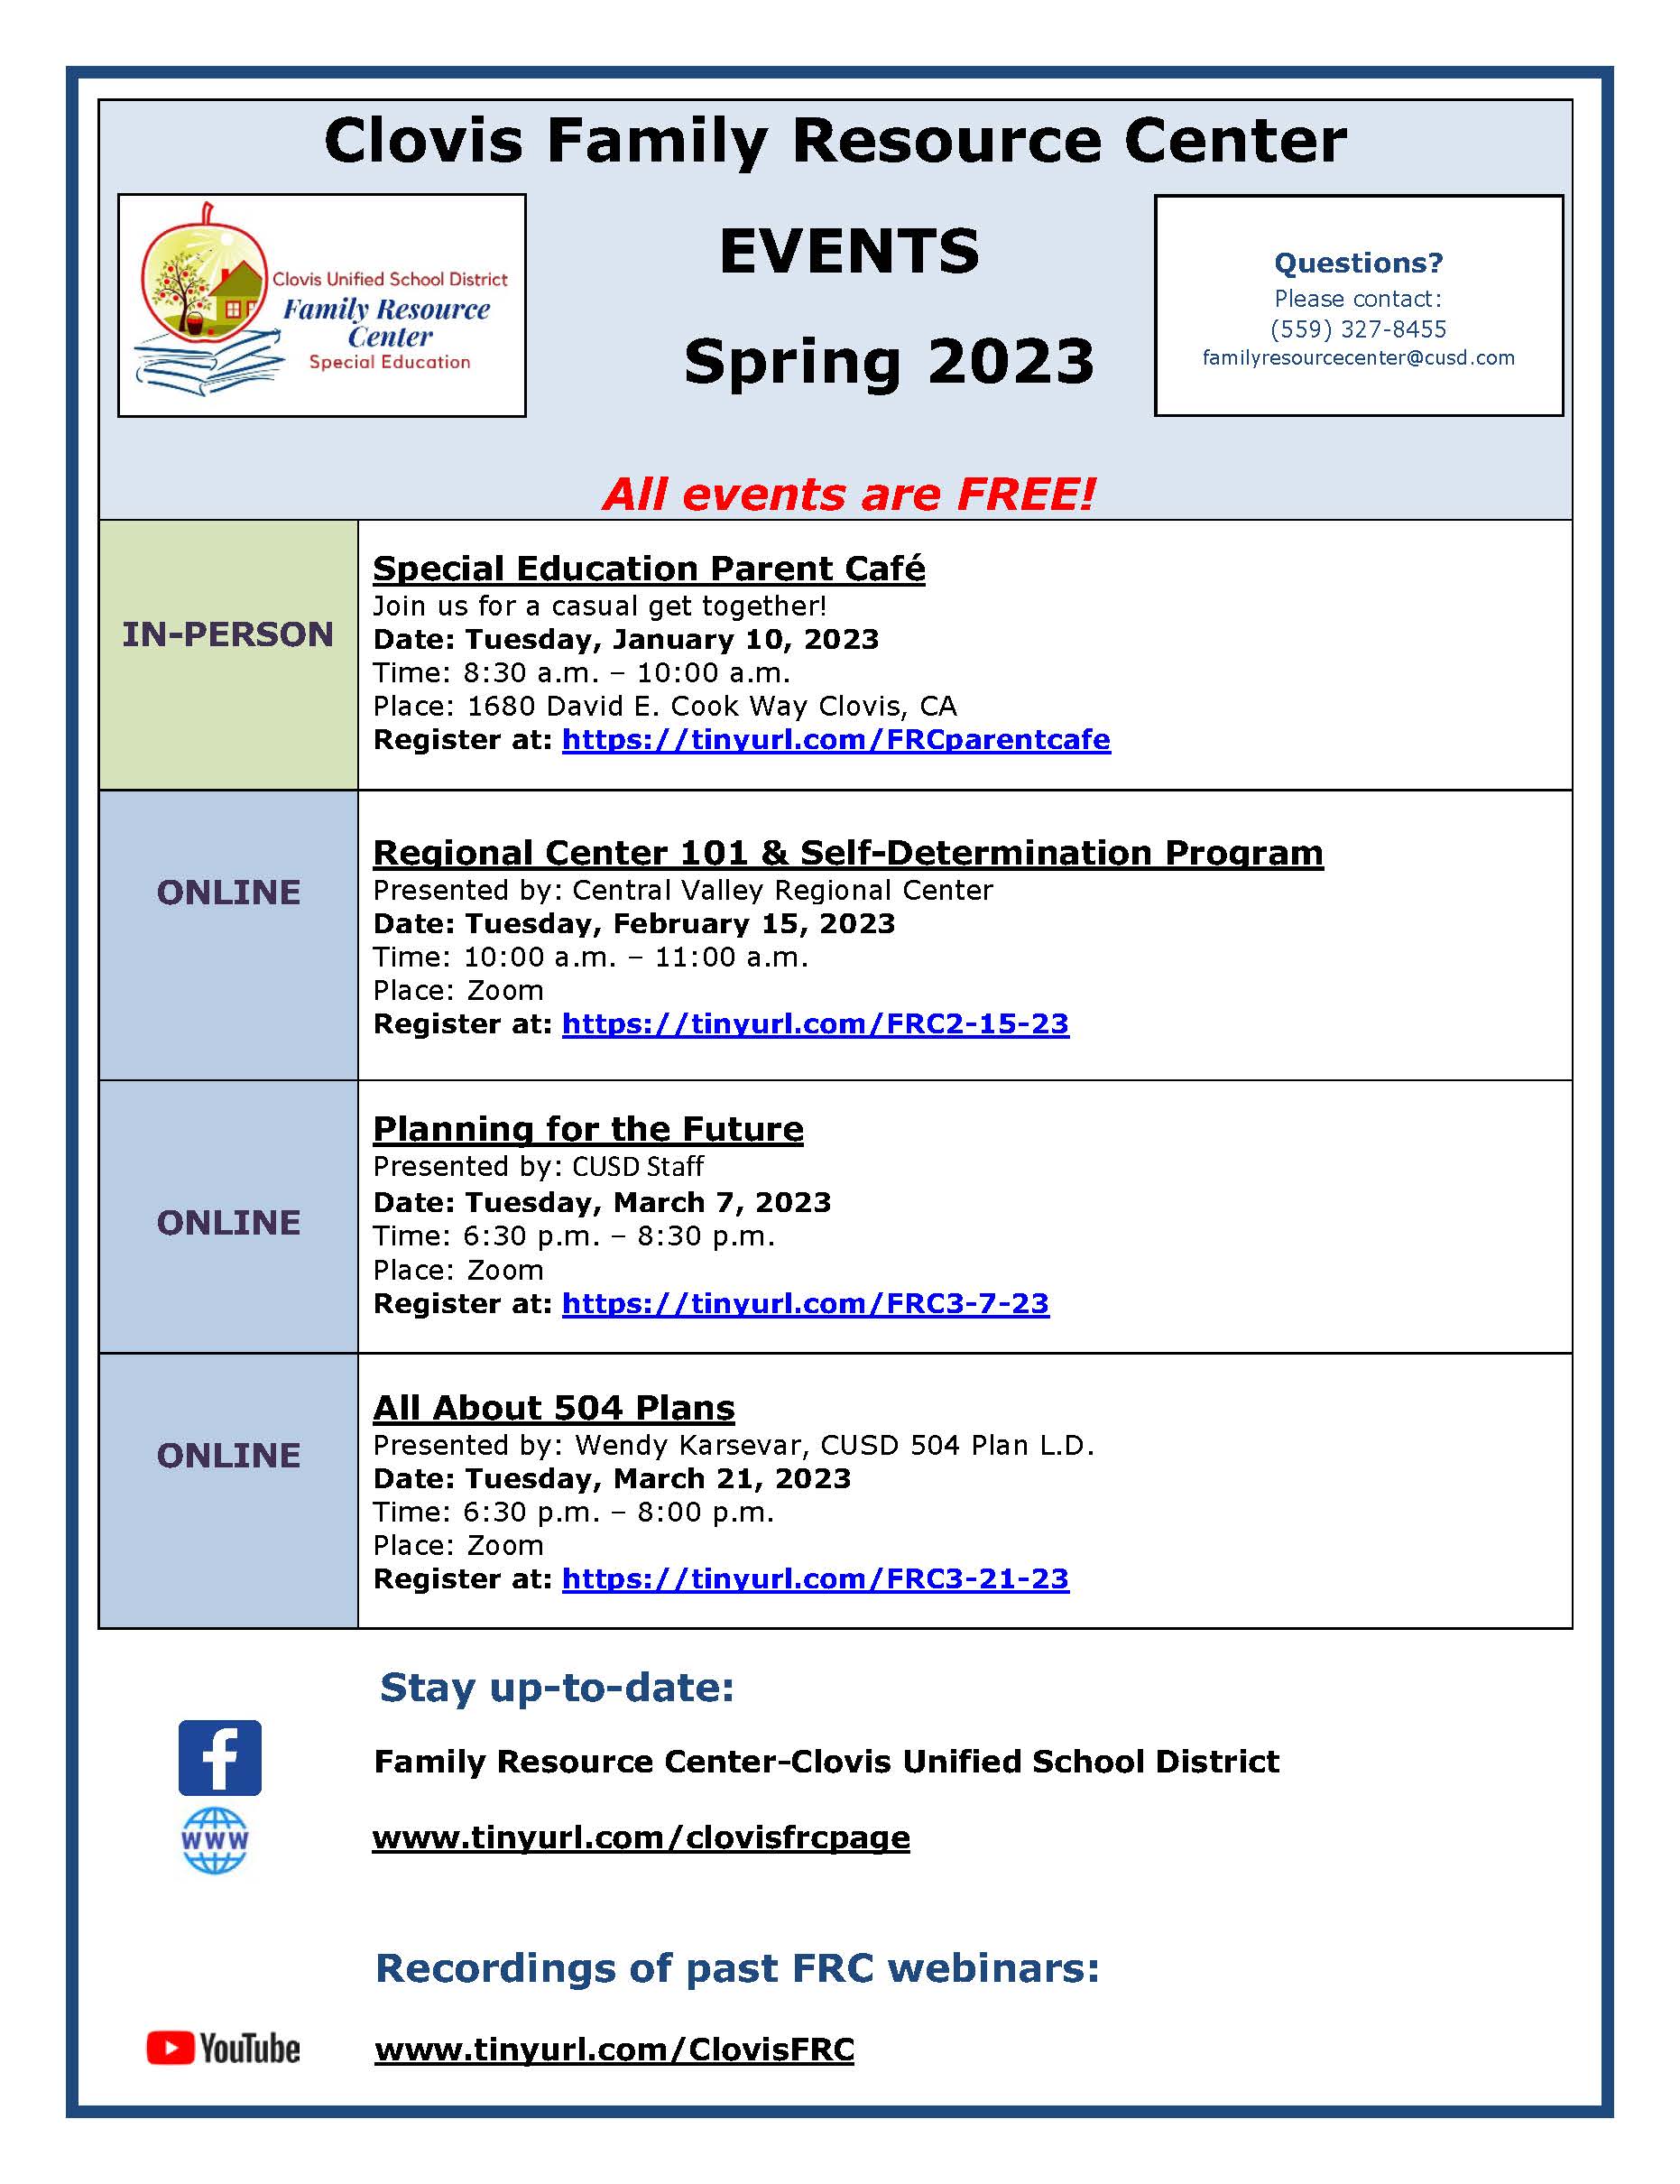 Image of Spring 2023 FRC events calendar. RTF version available for download on the right-hand side of this page.